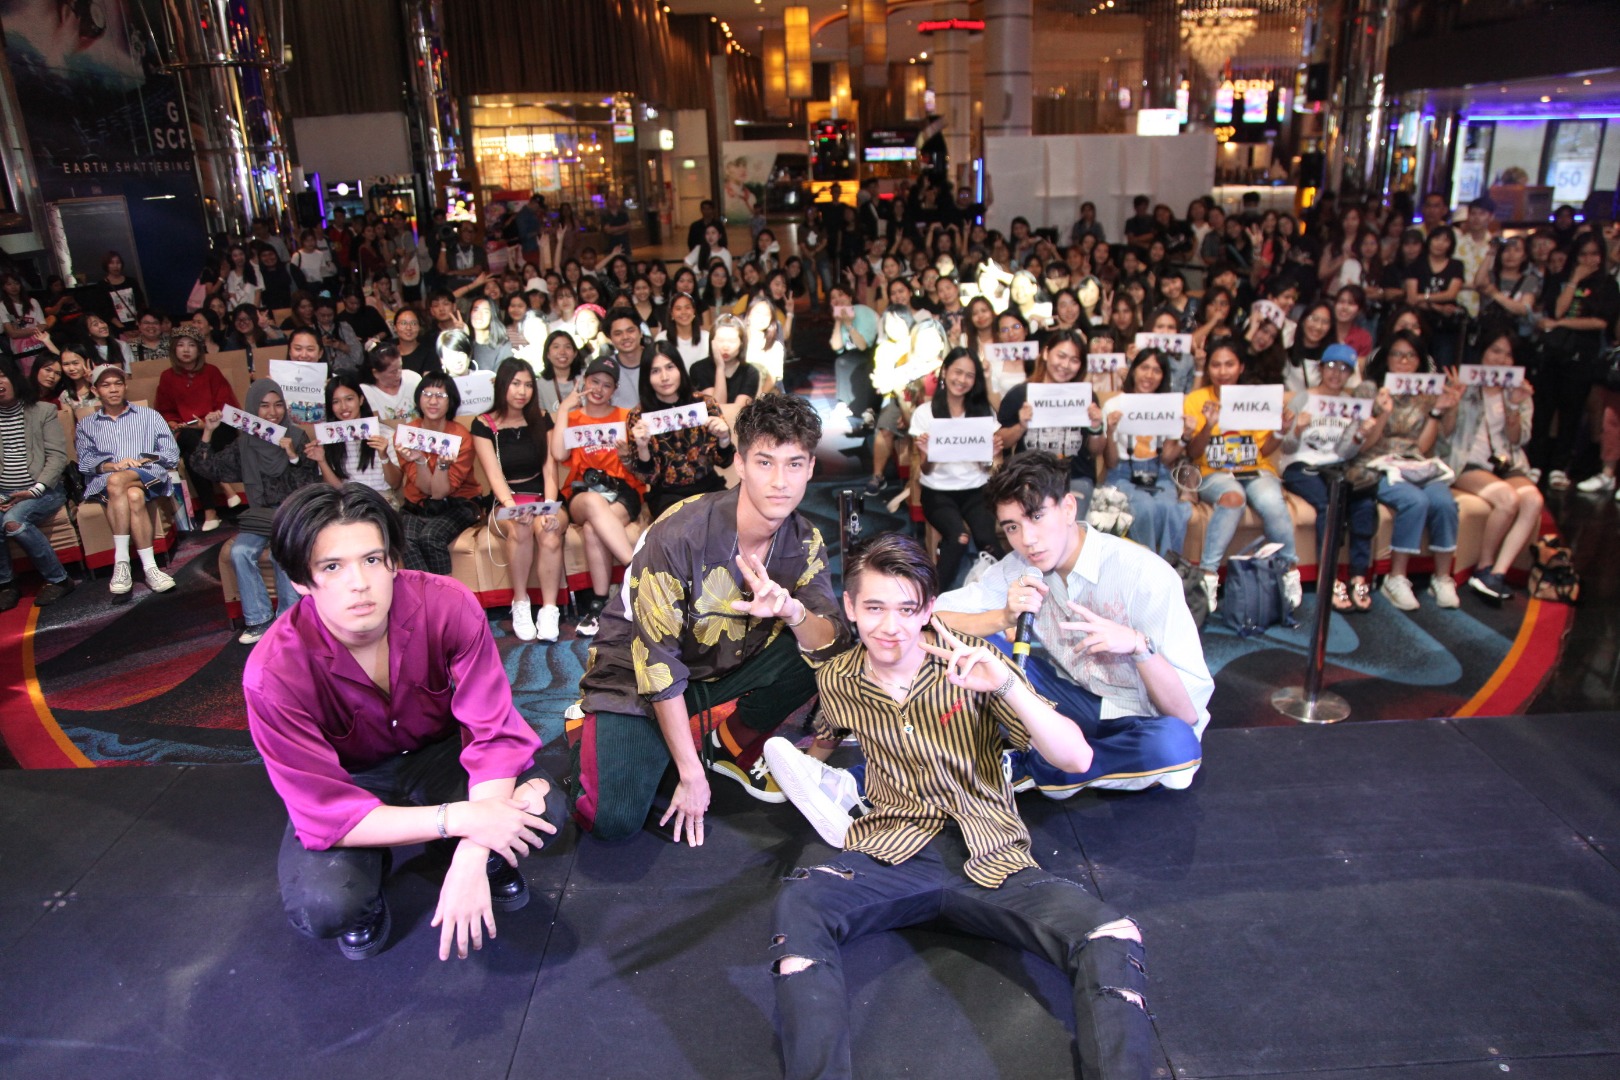 INTERSECTION 1ST FAN EVENT IN BANGKOK